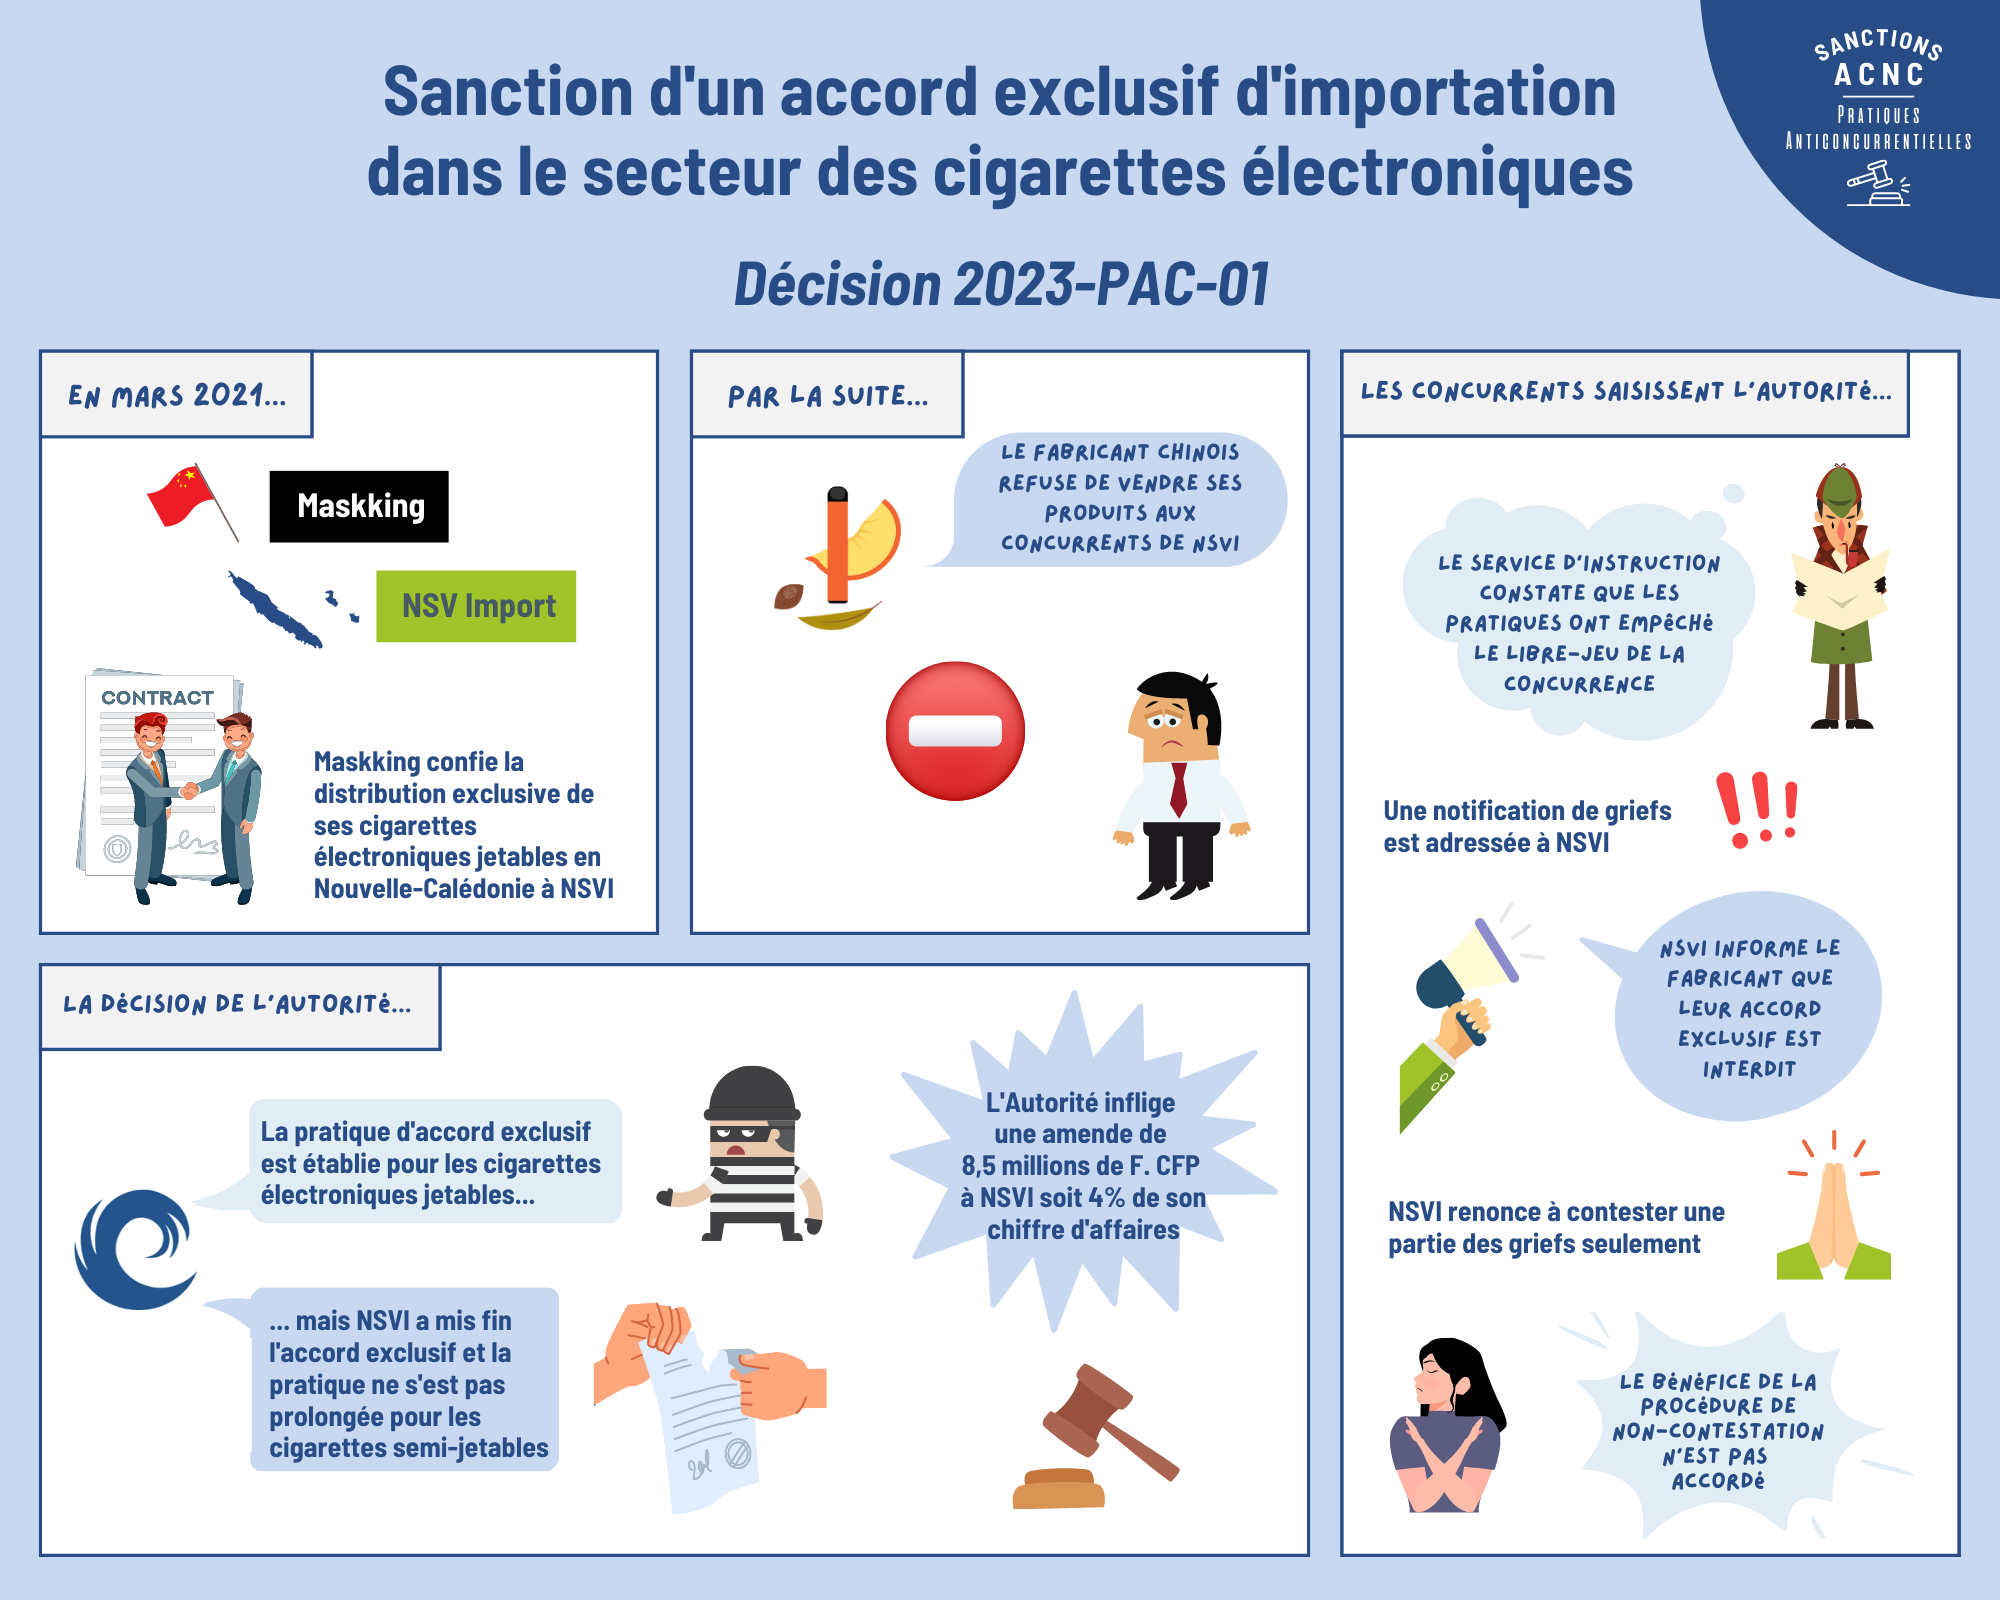 Accords exclusifs d'importation